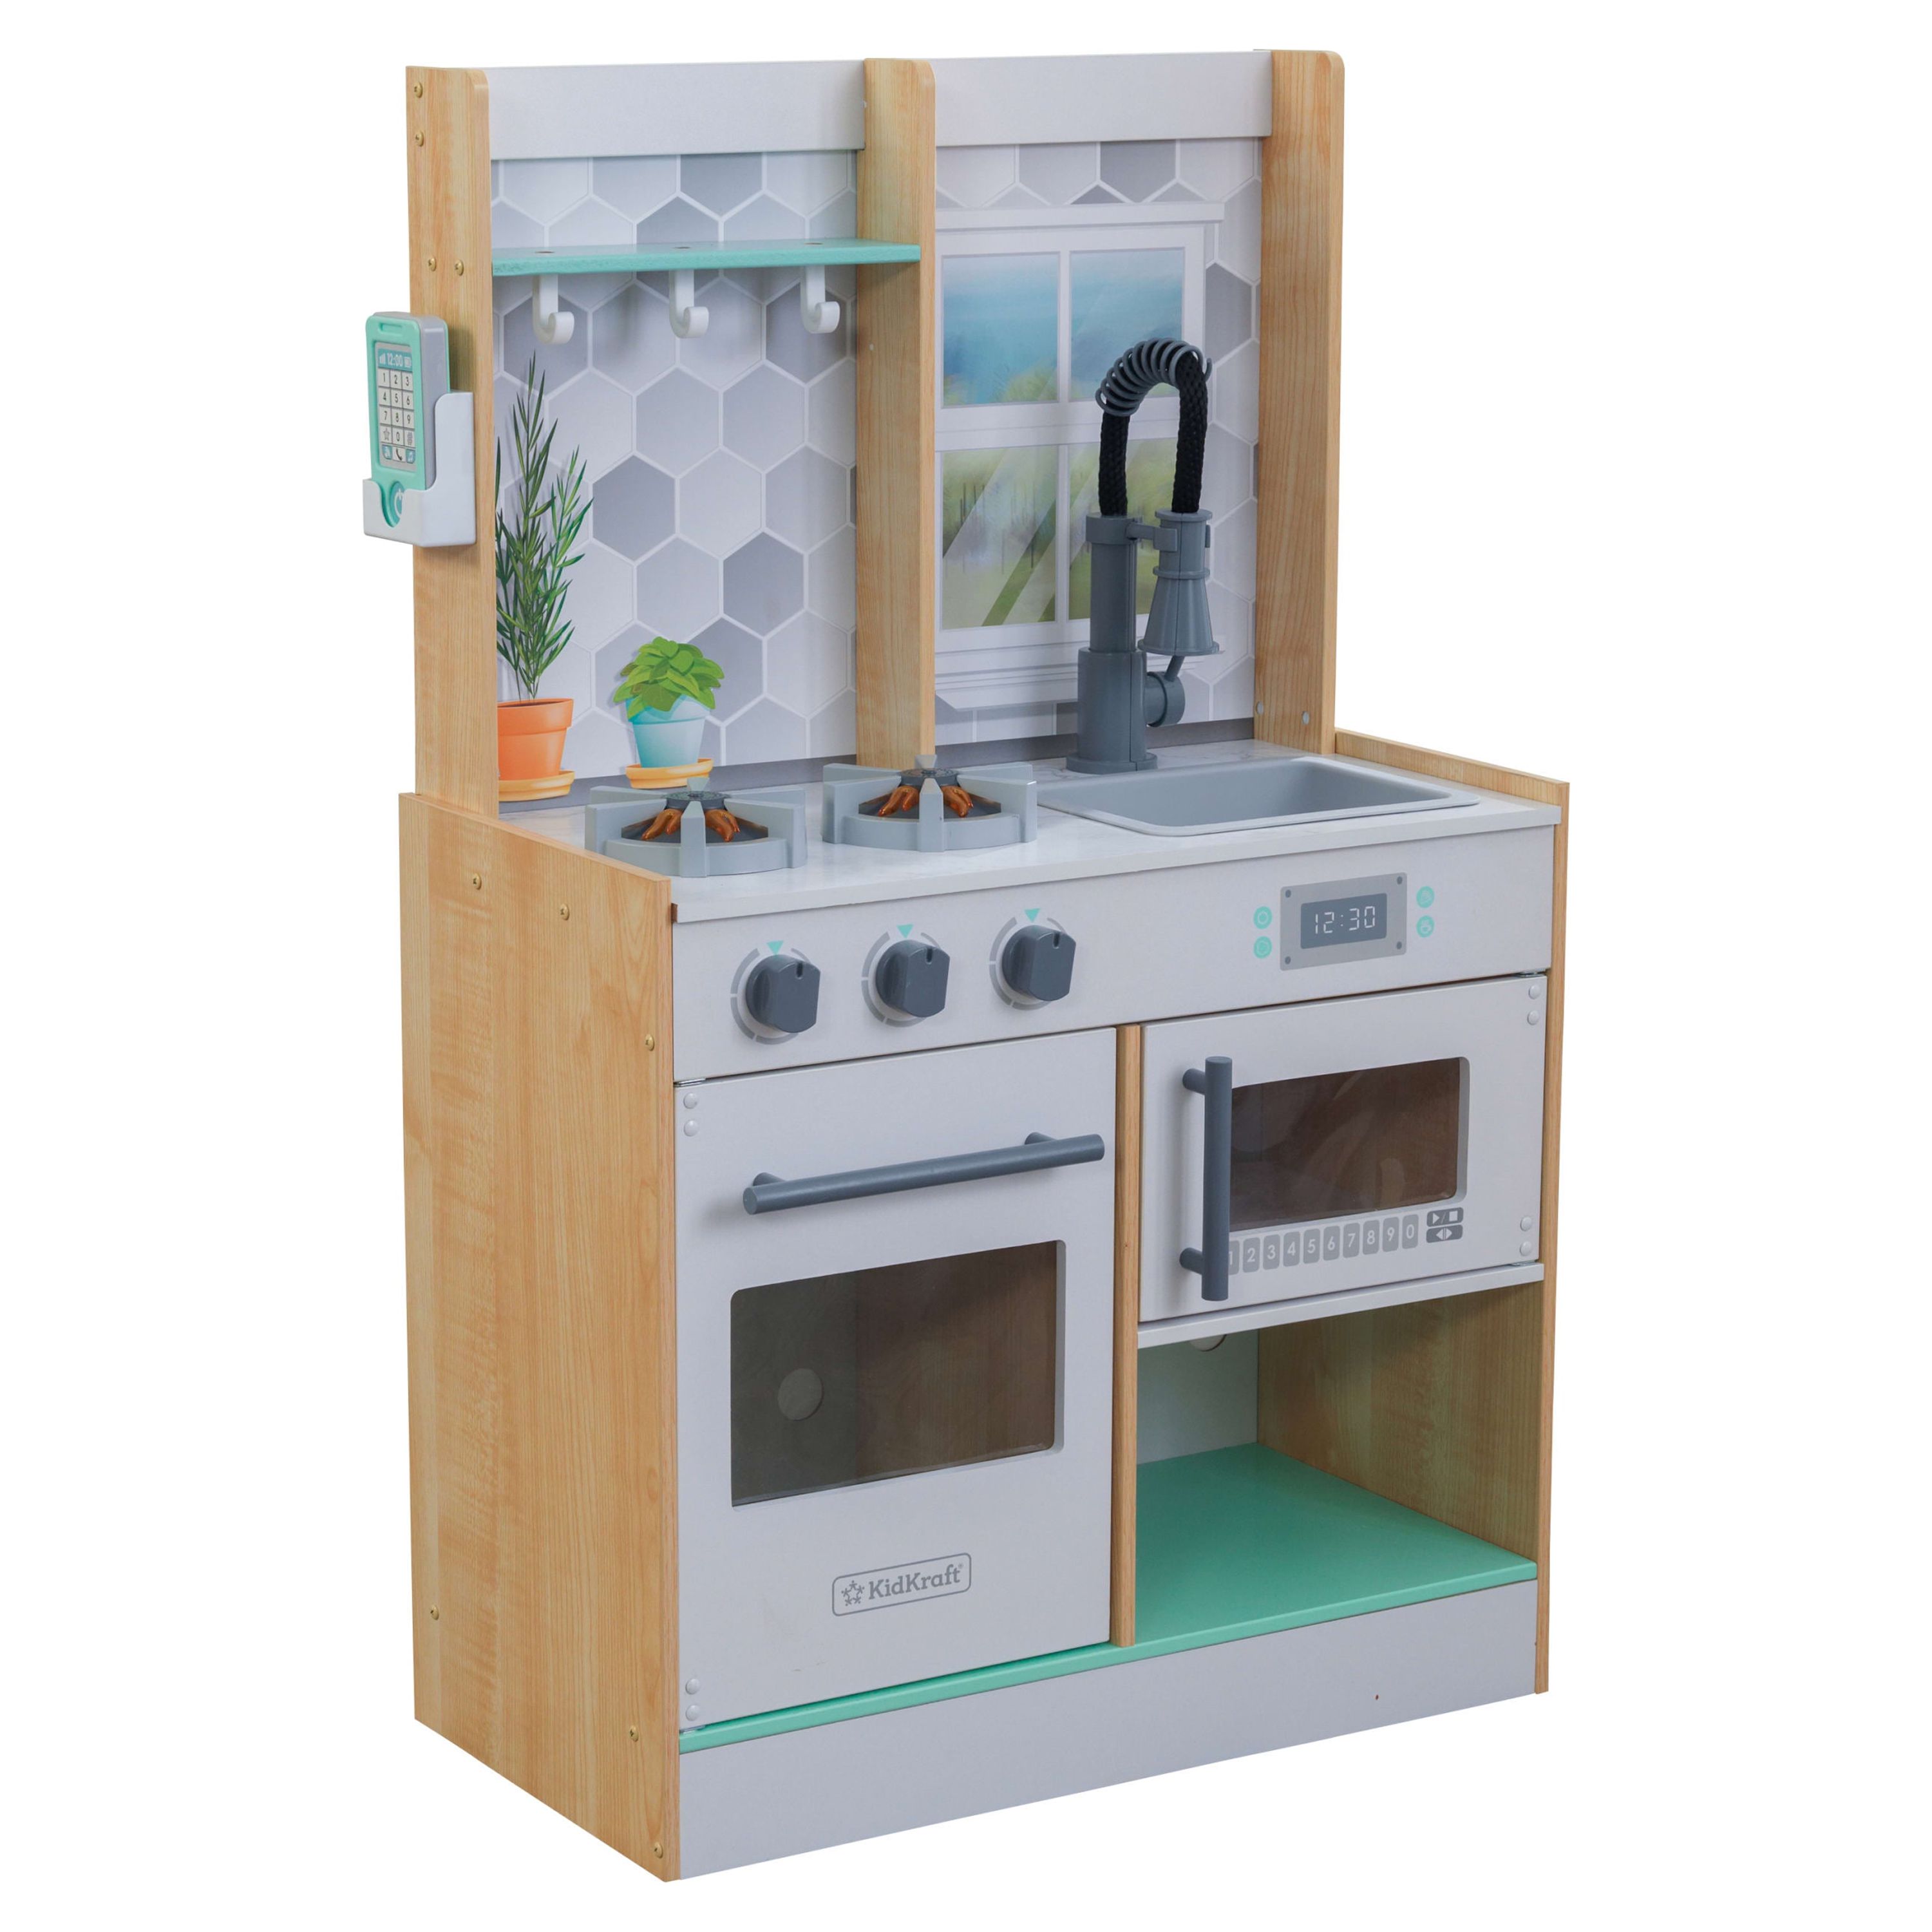 Let's Cook Wooden Play Kitchen with Lights & Sounds, Natural - image 1 of 10